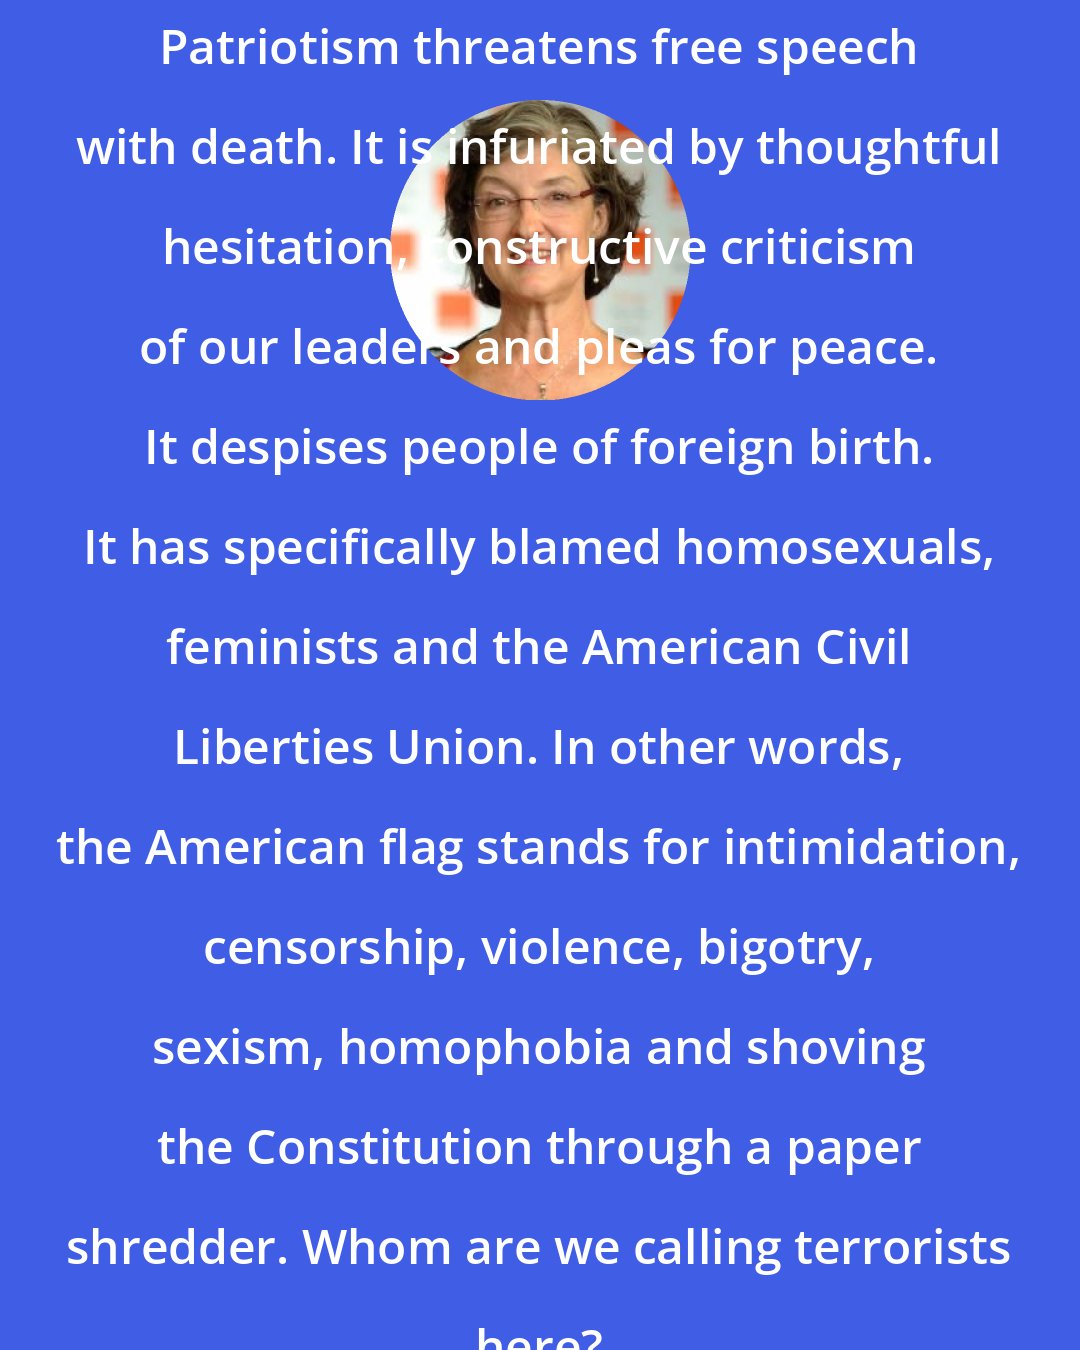 Barbara Kingsolver: Patriotism threatens free speech with death. It is infuriated by thoughtful hesitation, constructive criticism of our leaders and pleas for peace. It despises people of foreign birth. It has specifically blamed homosexuals, feminists and the American Civil Liberties Union. In other words, the American flag stands for intimidation, censorship, violence, bigotry, sexism, homophobia and shoving the Constitution through a paper shredder. Whom are we calling terrorists here?